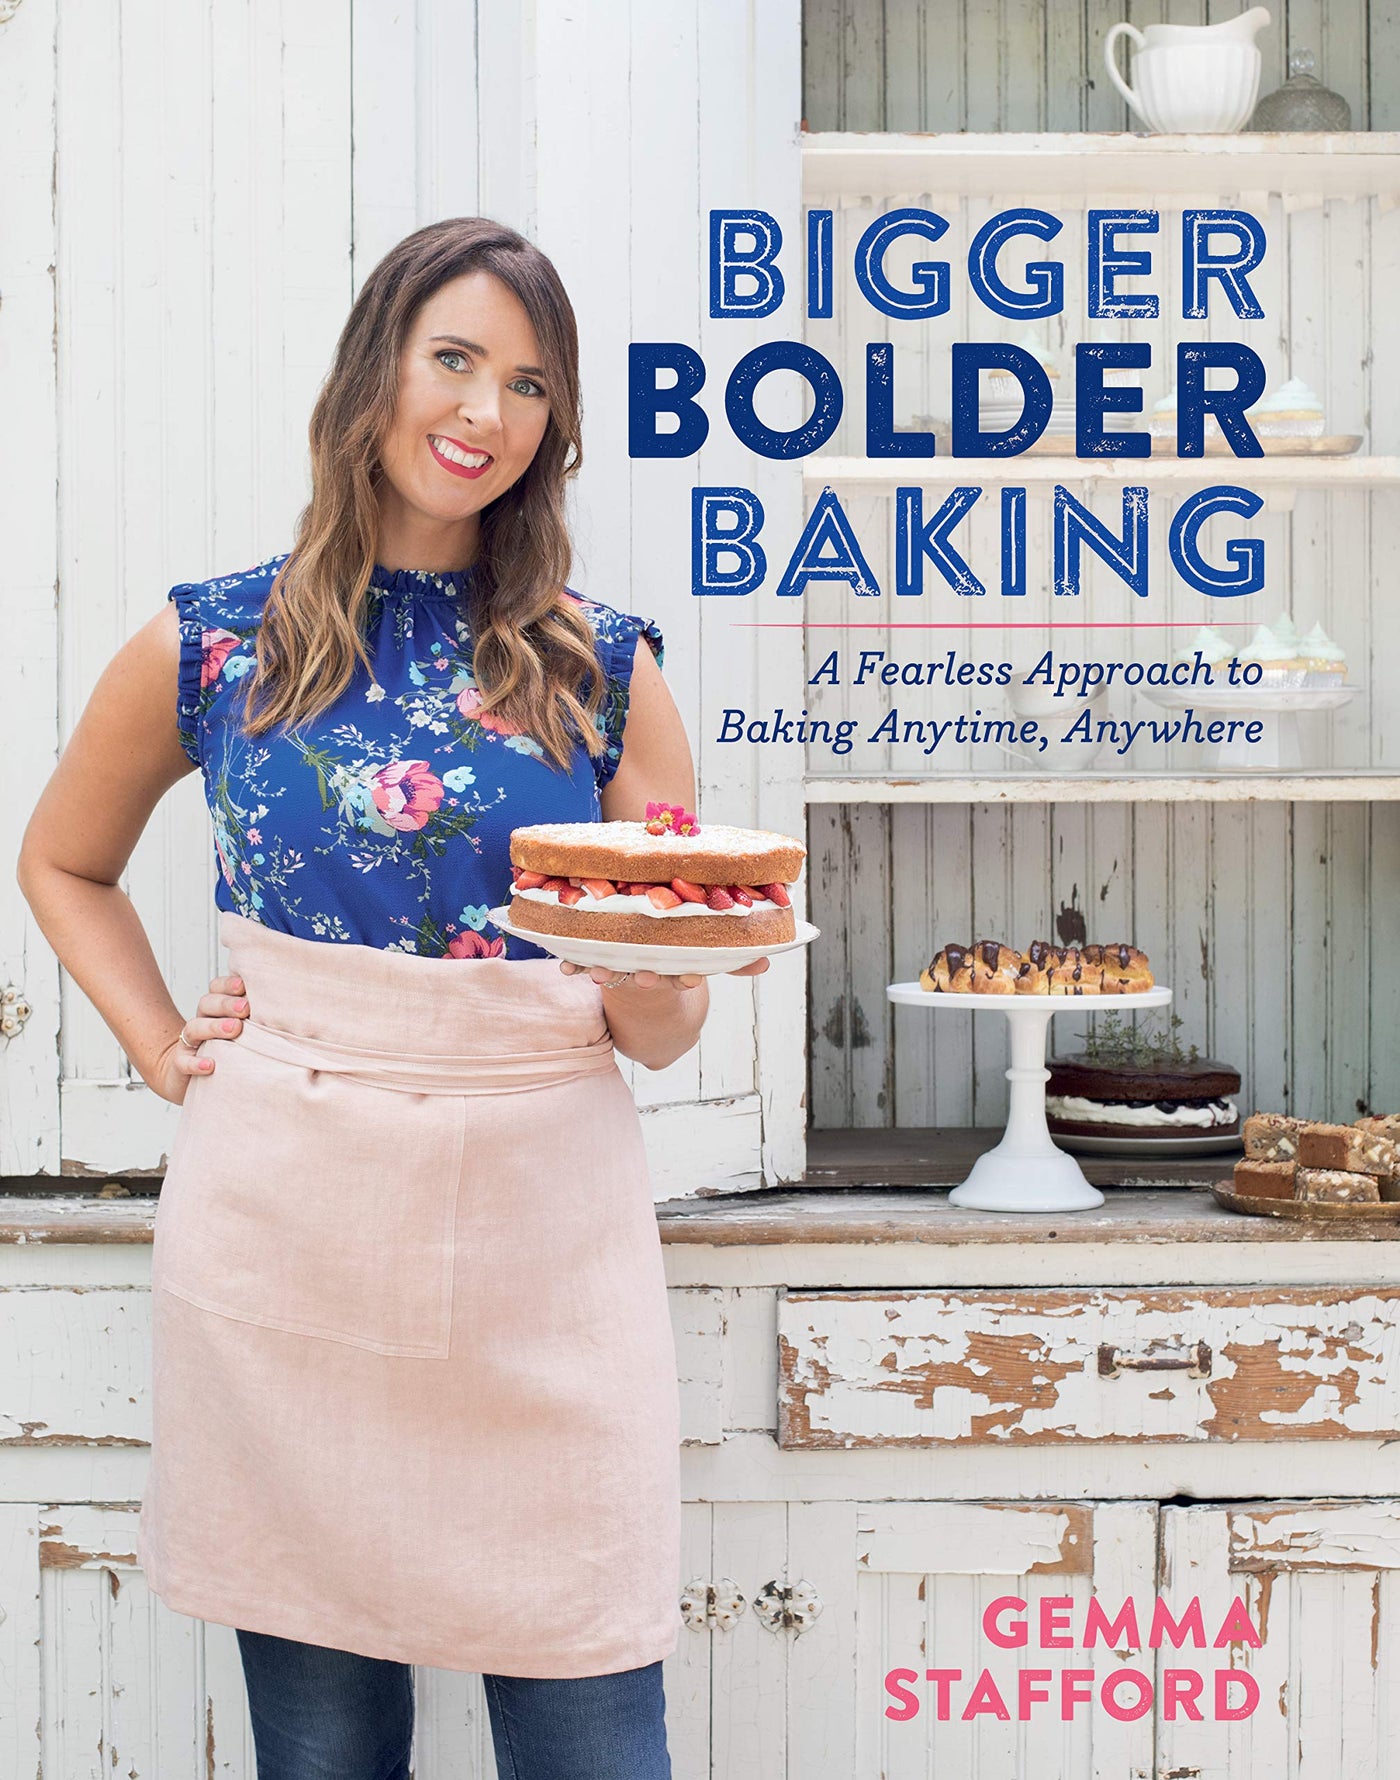 Bigger, Bolder Baking:  A Fearless Approach to Baking Anytime, Anywhere by Gemma Stafford